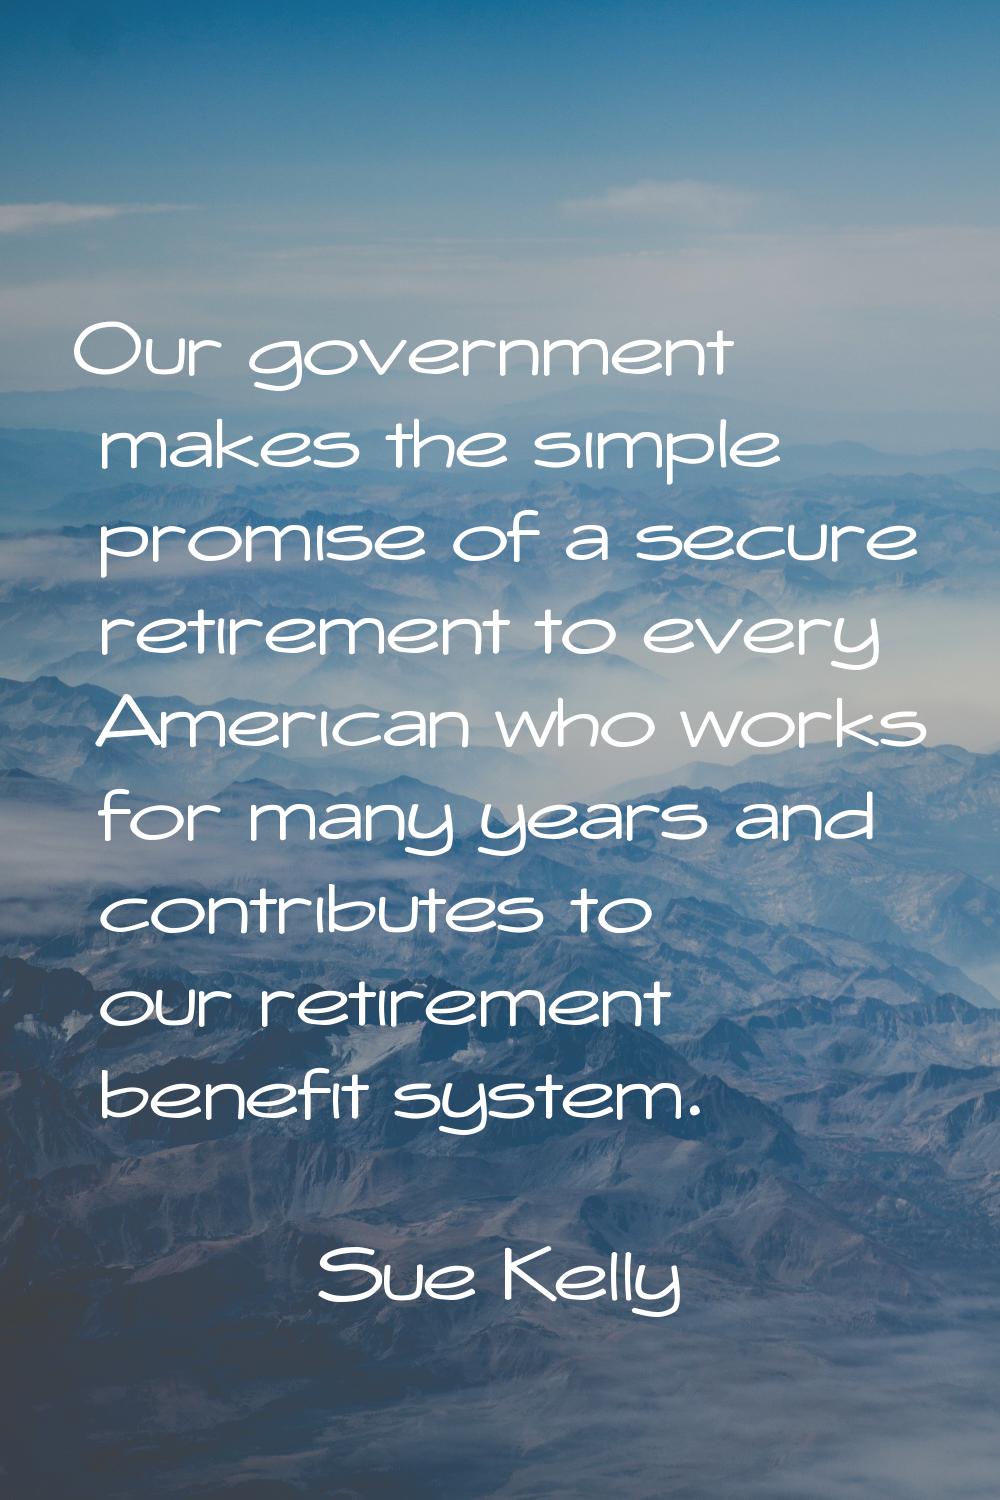 Our government makes the simple promise of a secure retirement to every American who works for many